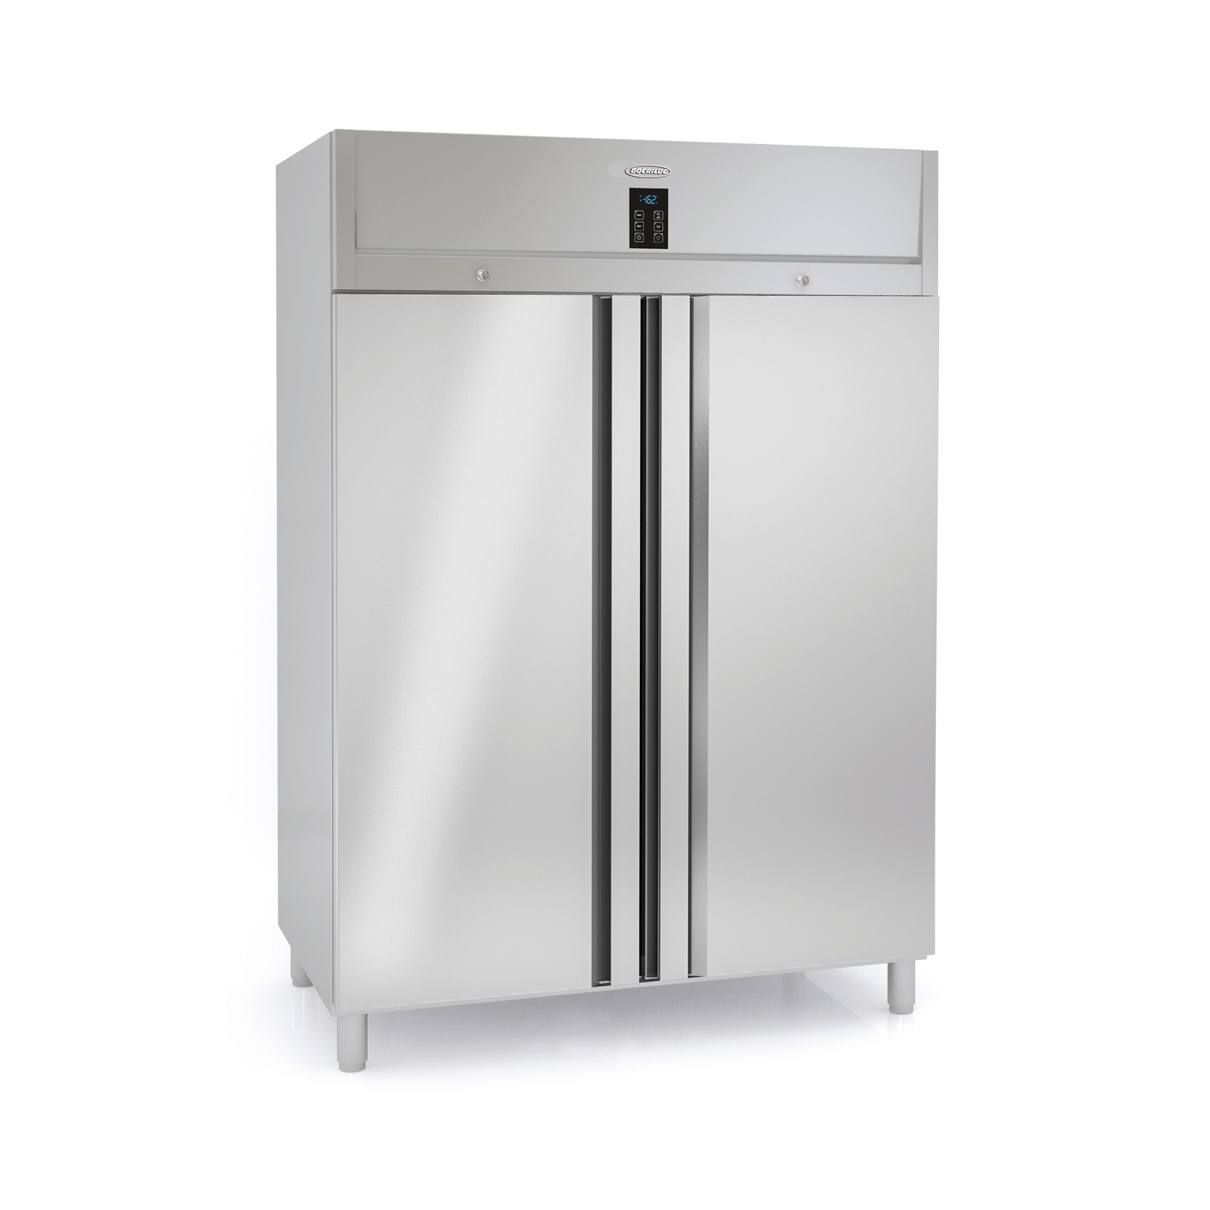 Gastronorm 2/1 High Efficiency Refrigerated Cabinet DHEGR-140-2